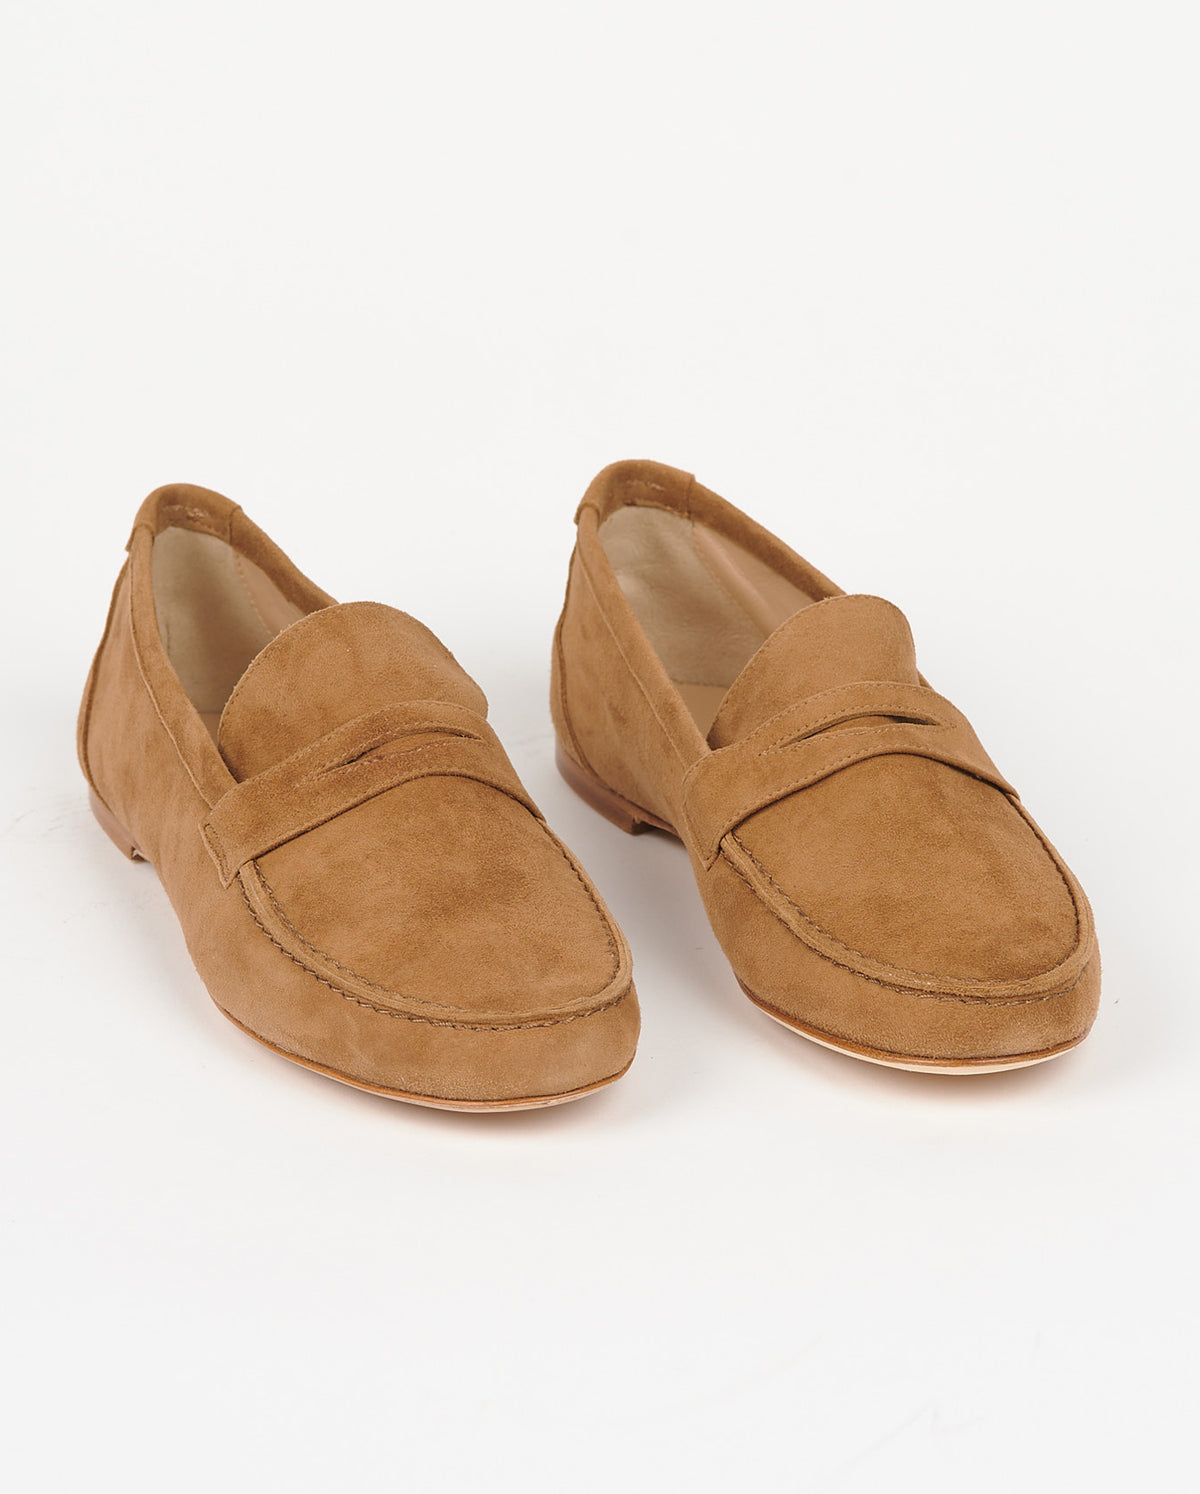 The Penny Loafer - Clove Suede